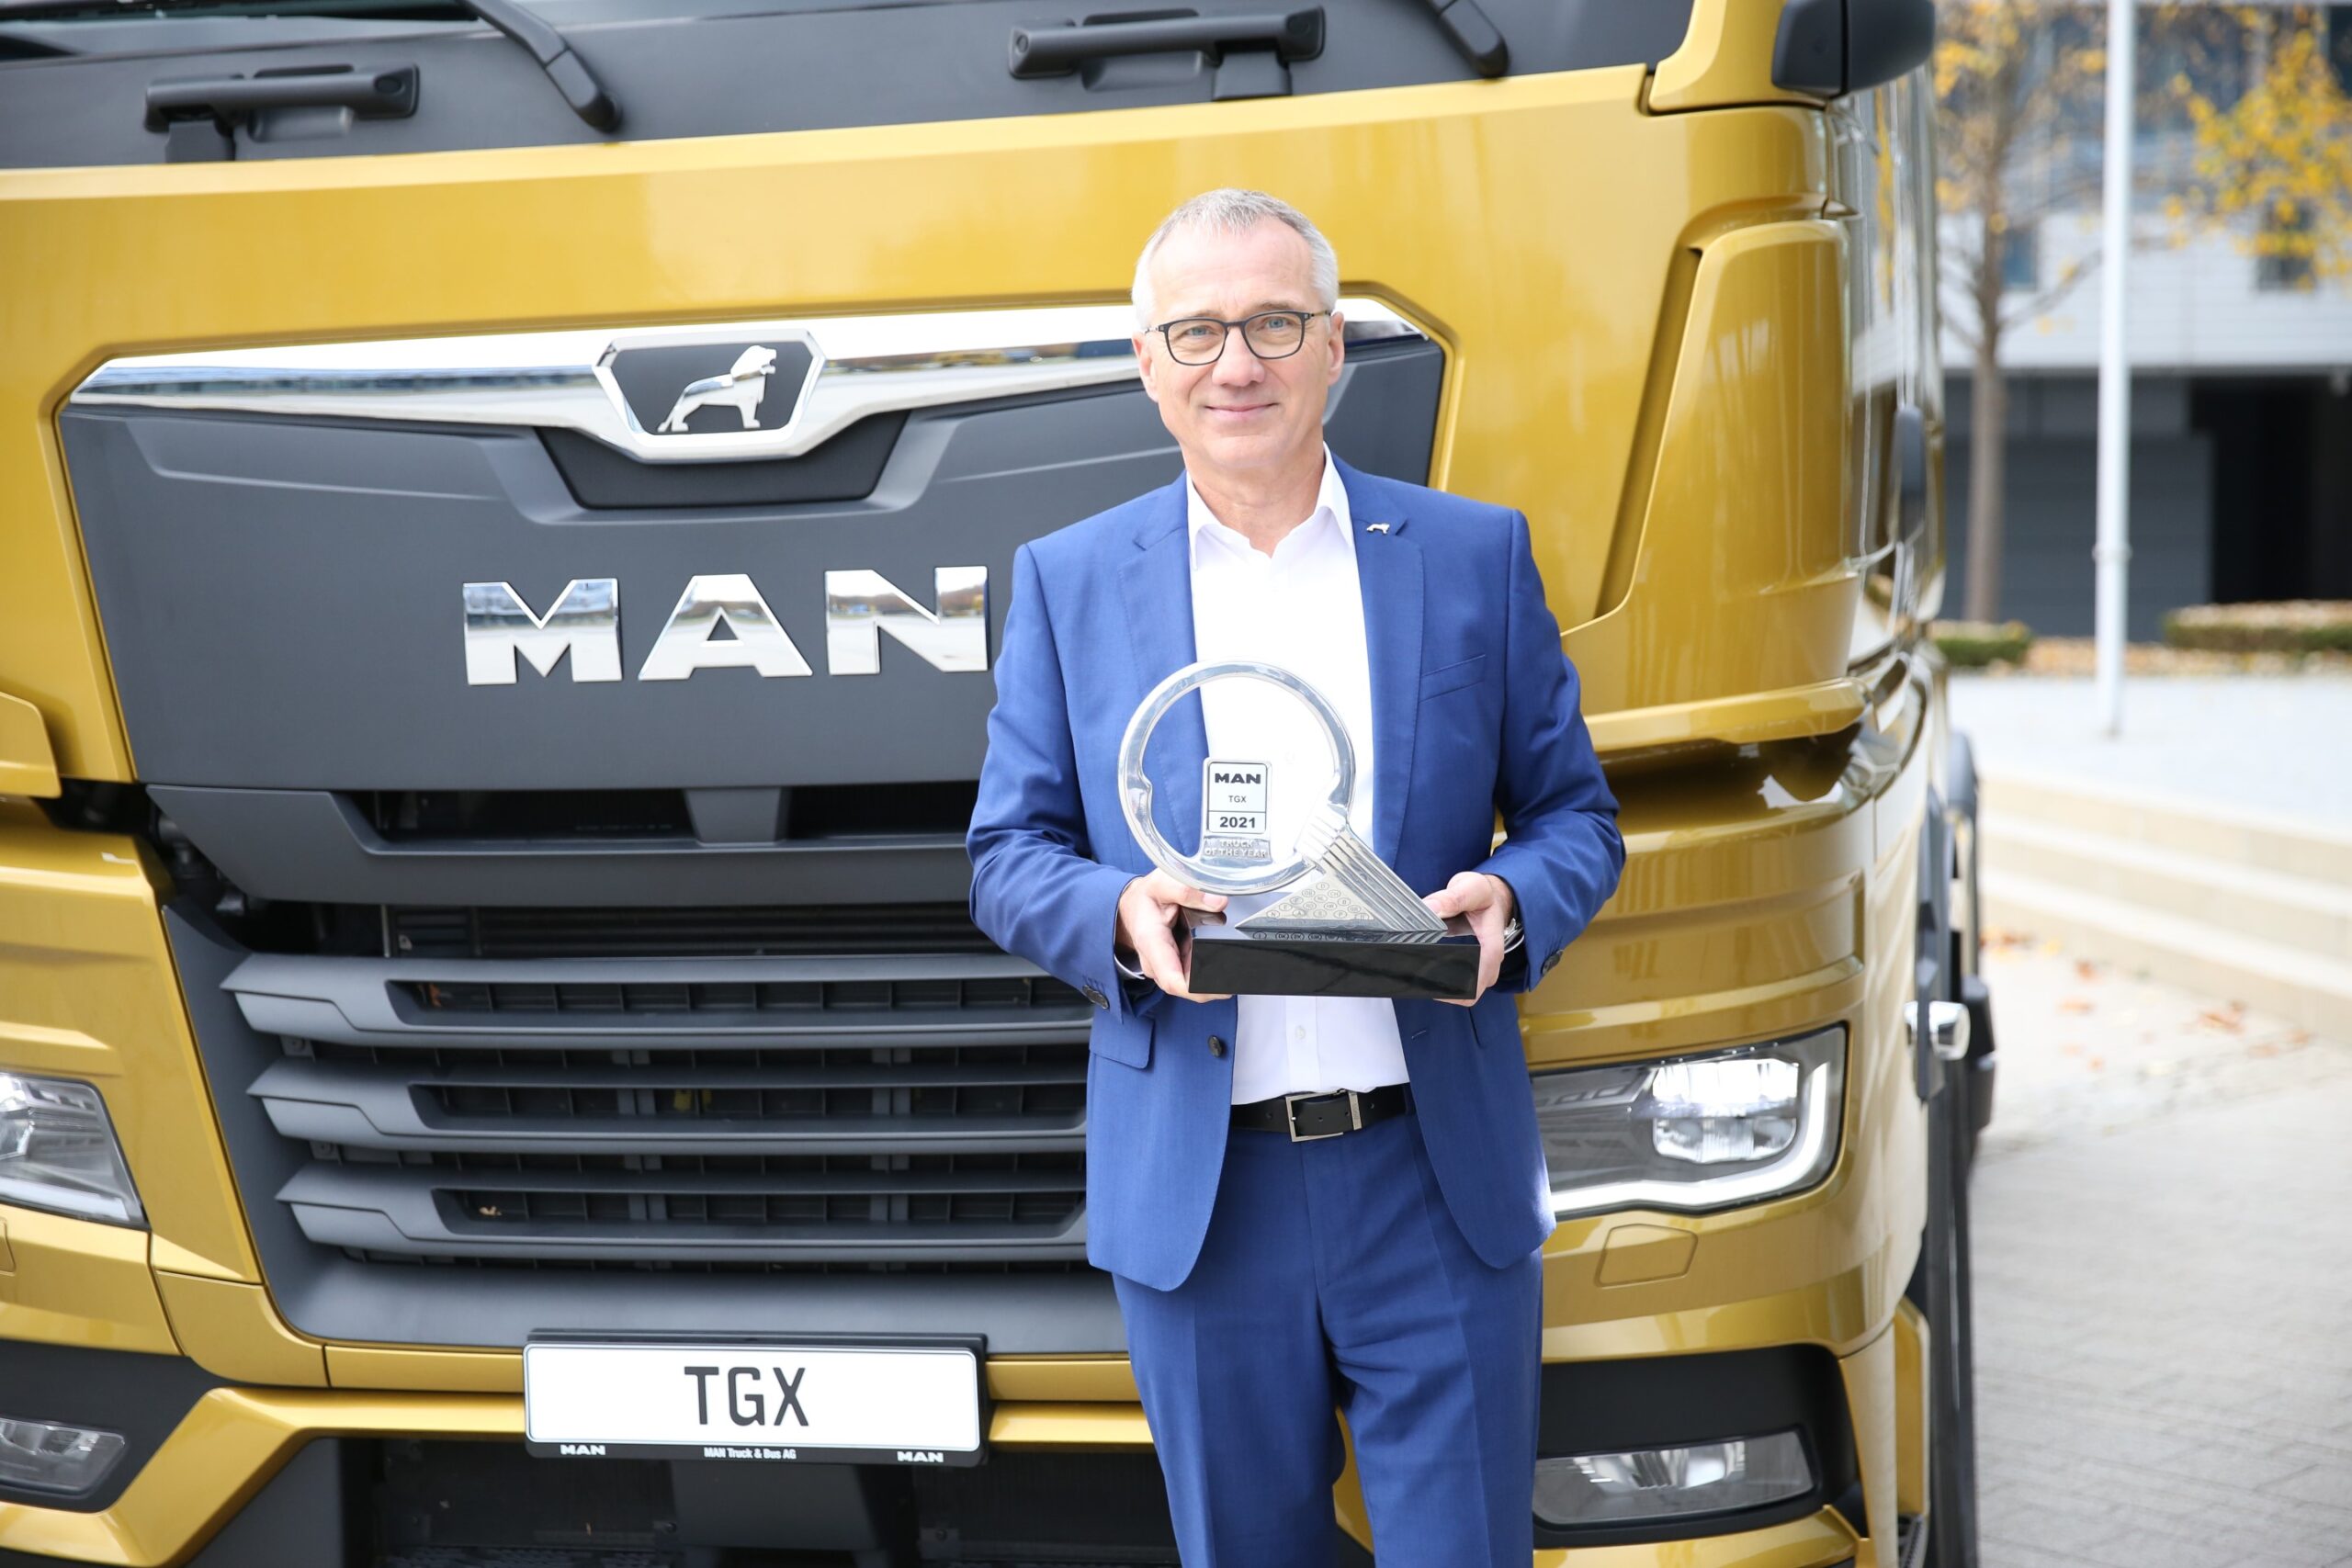 MAN TGX is Truck of the Year 2021